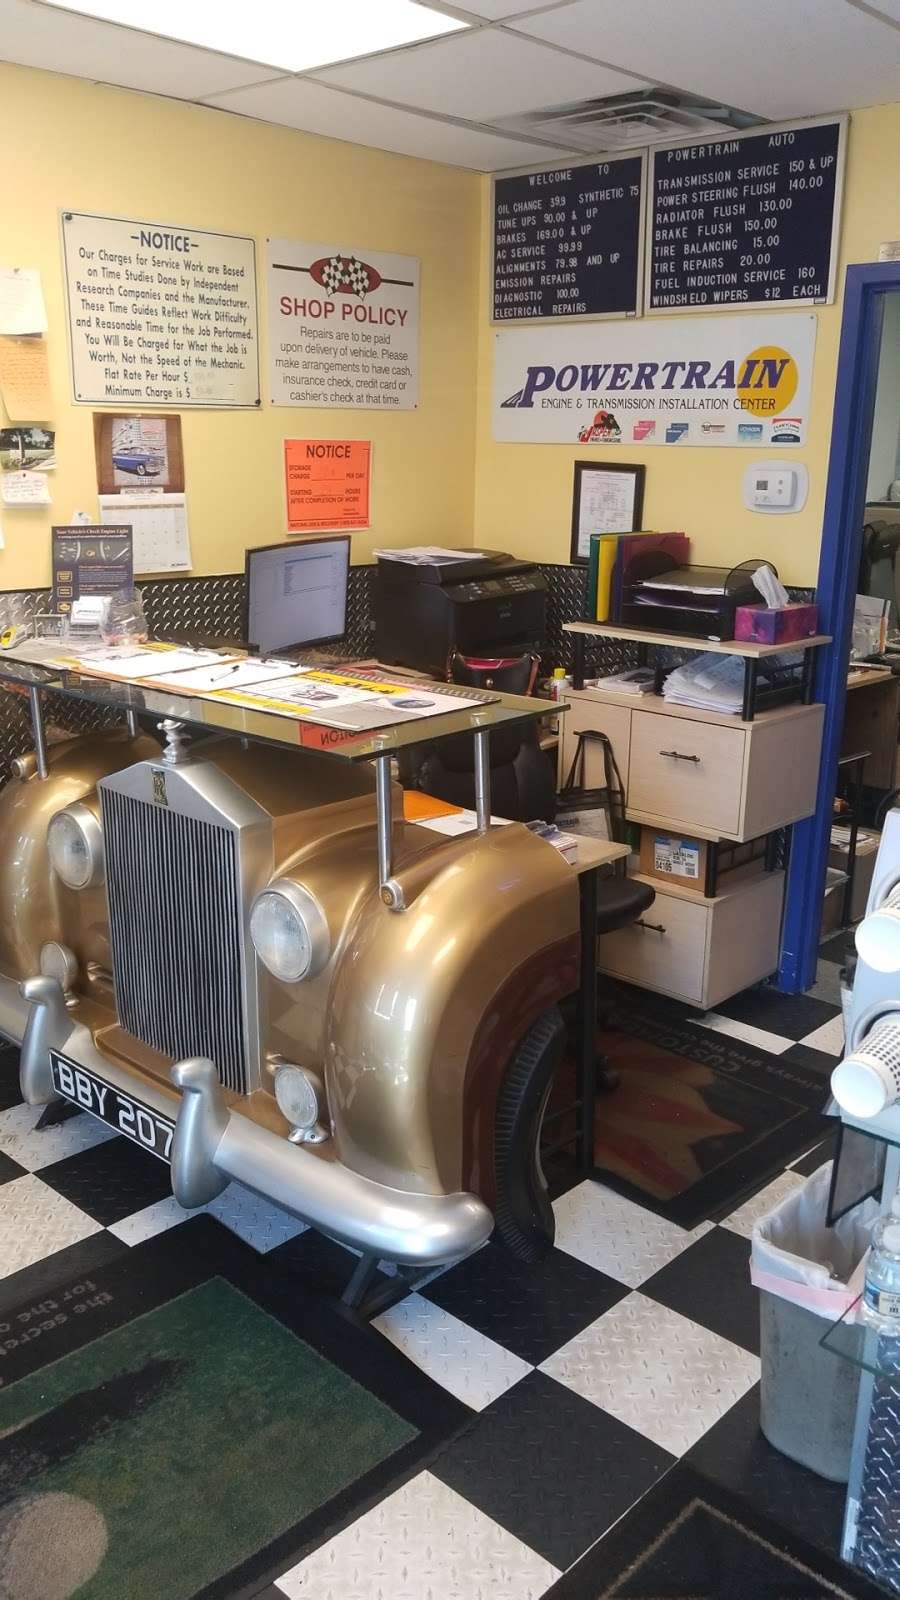 Goodyear Bowie - car repair  | Photo 1 of 4 | Address: 2325 Crain Hwy, Bowie, MD 20716, USA | Phone: (301) 249-4300